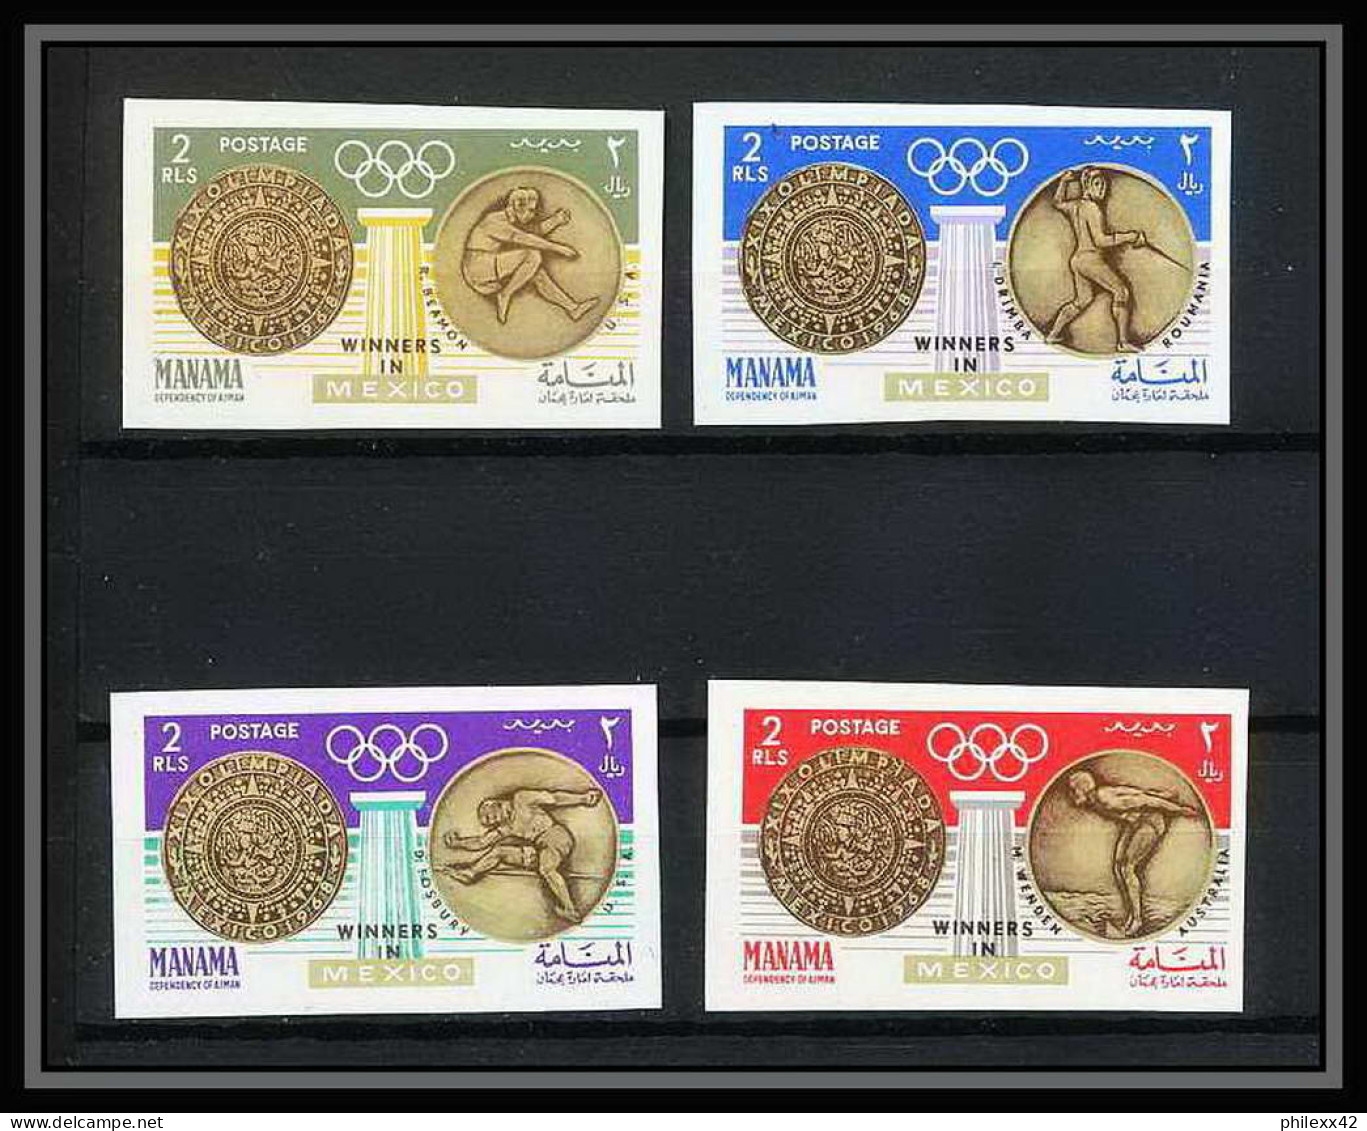 097d - Manama - MNH ** Mi N° 121 / 124 B Jeux Olympiques Olympic Games Gold Medalists Mexico 68 Non Dentelé (Imperf) - Manama